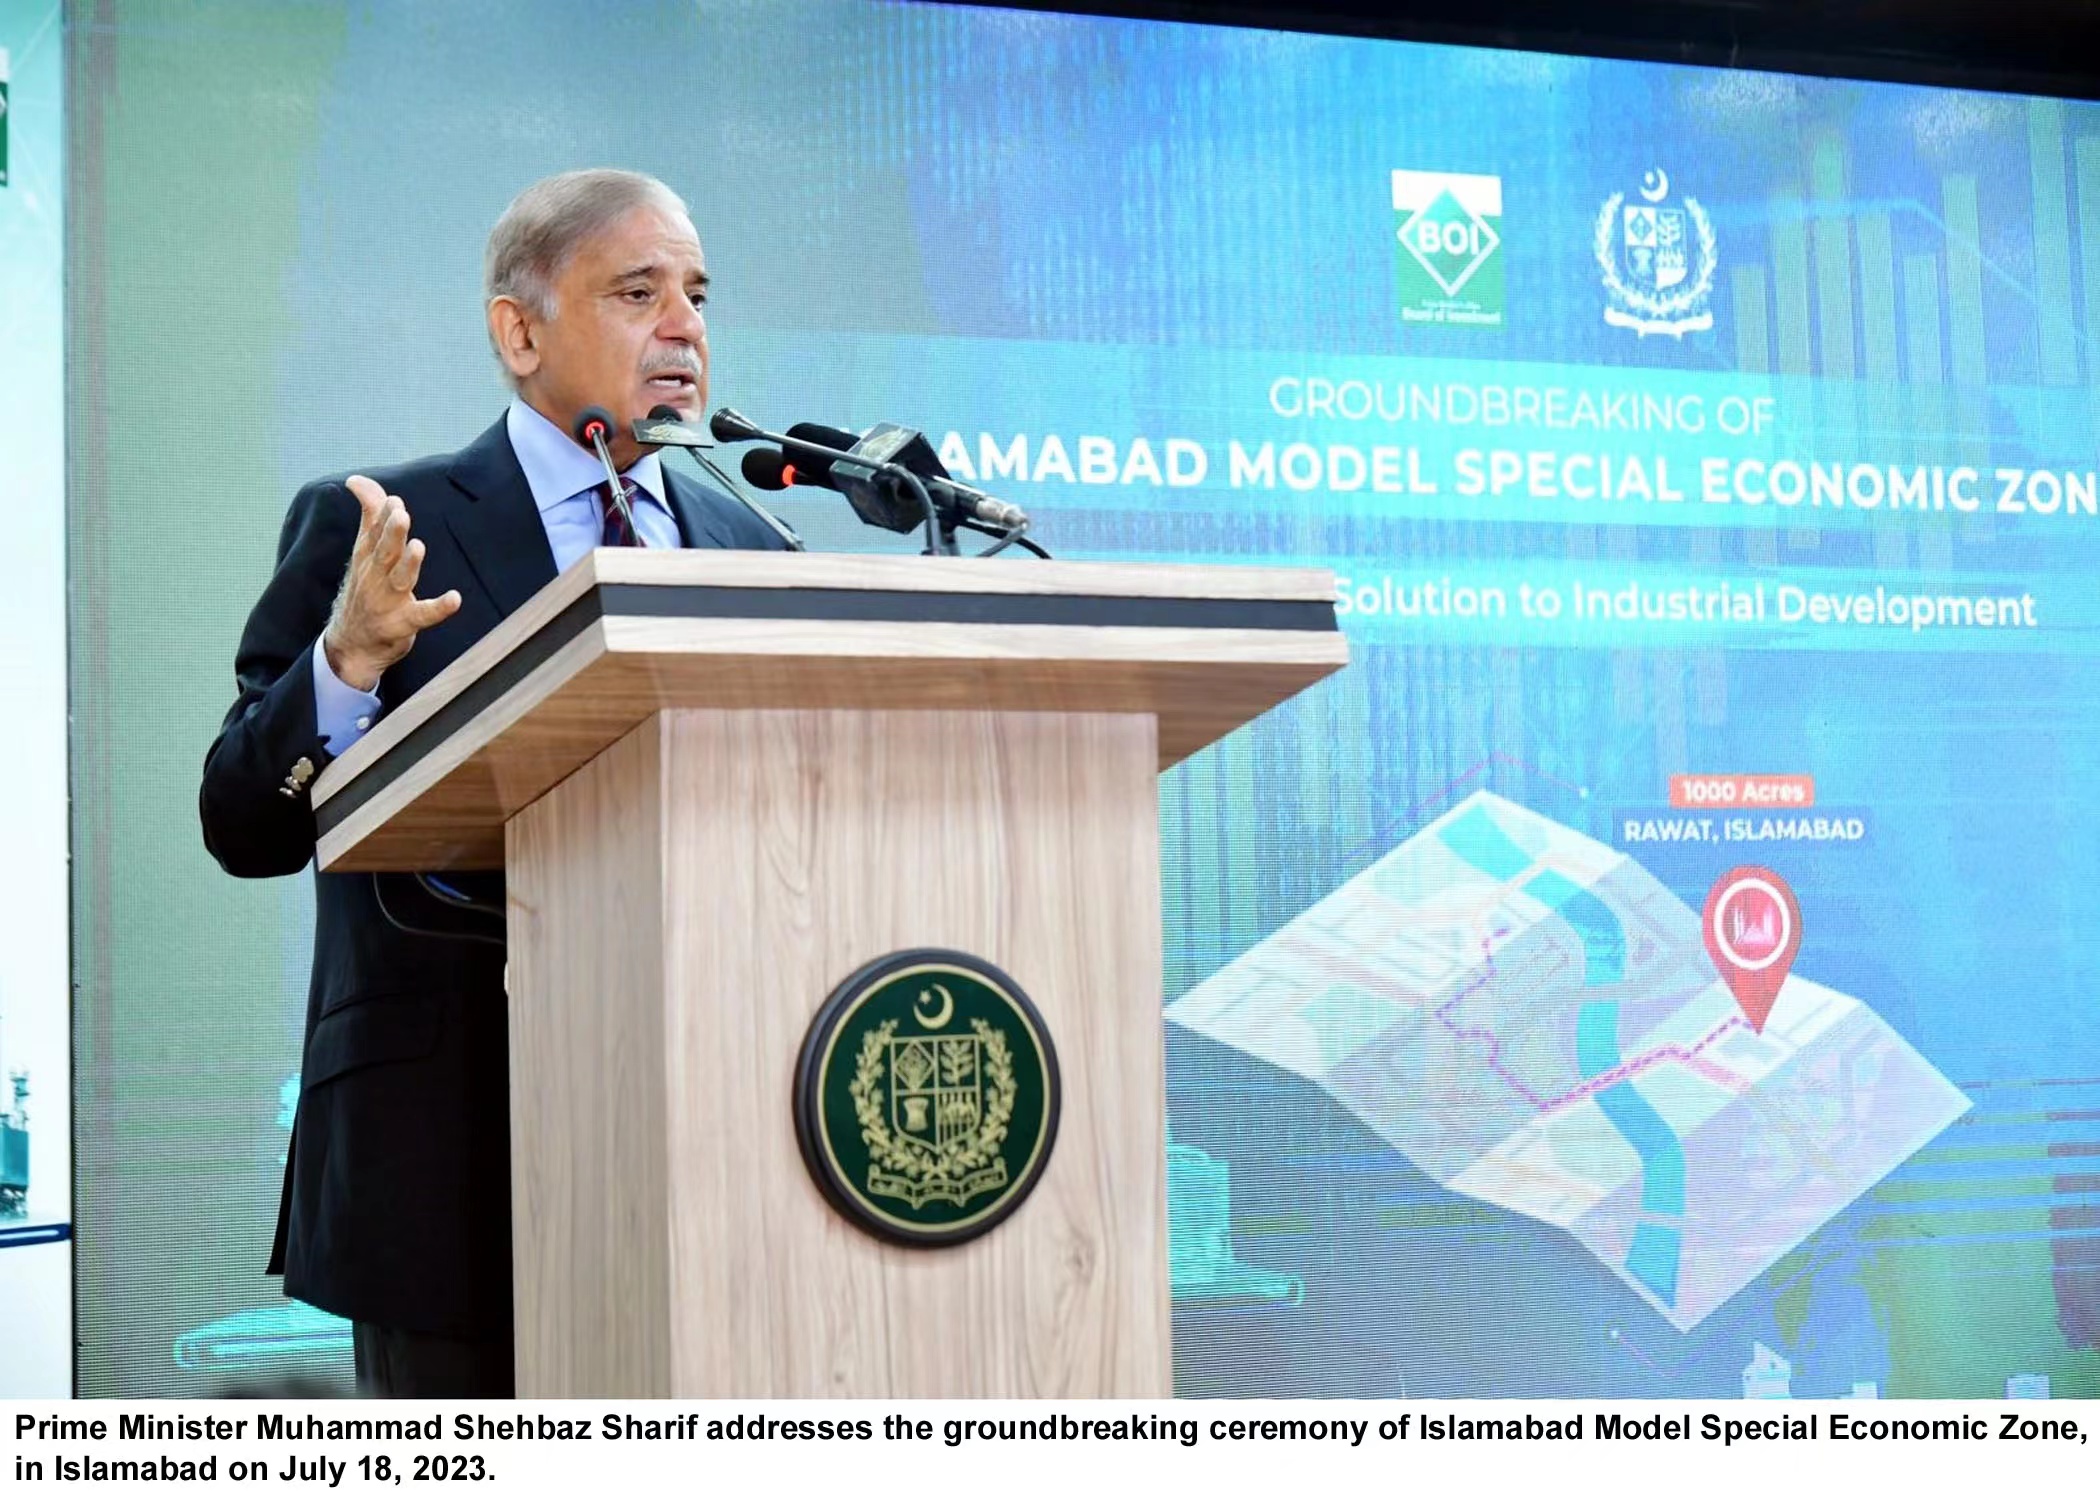 PM Shehbaz Sharif orders to provide lands to SEZs investors